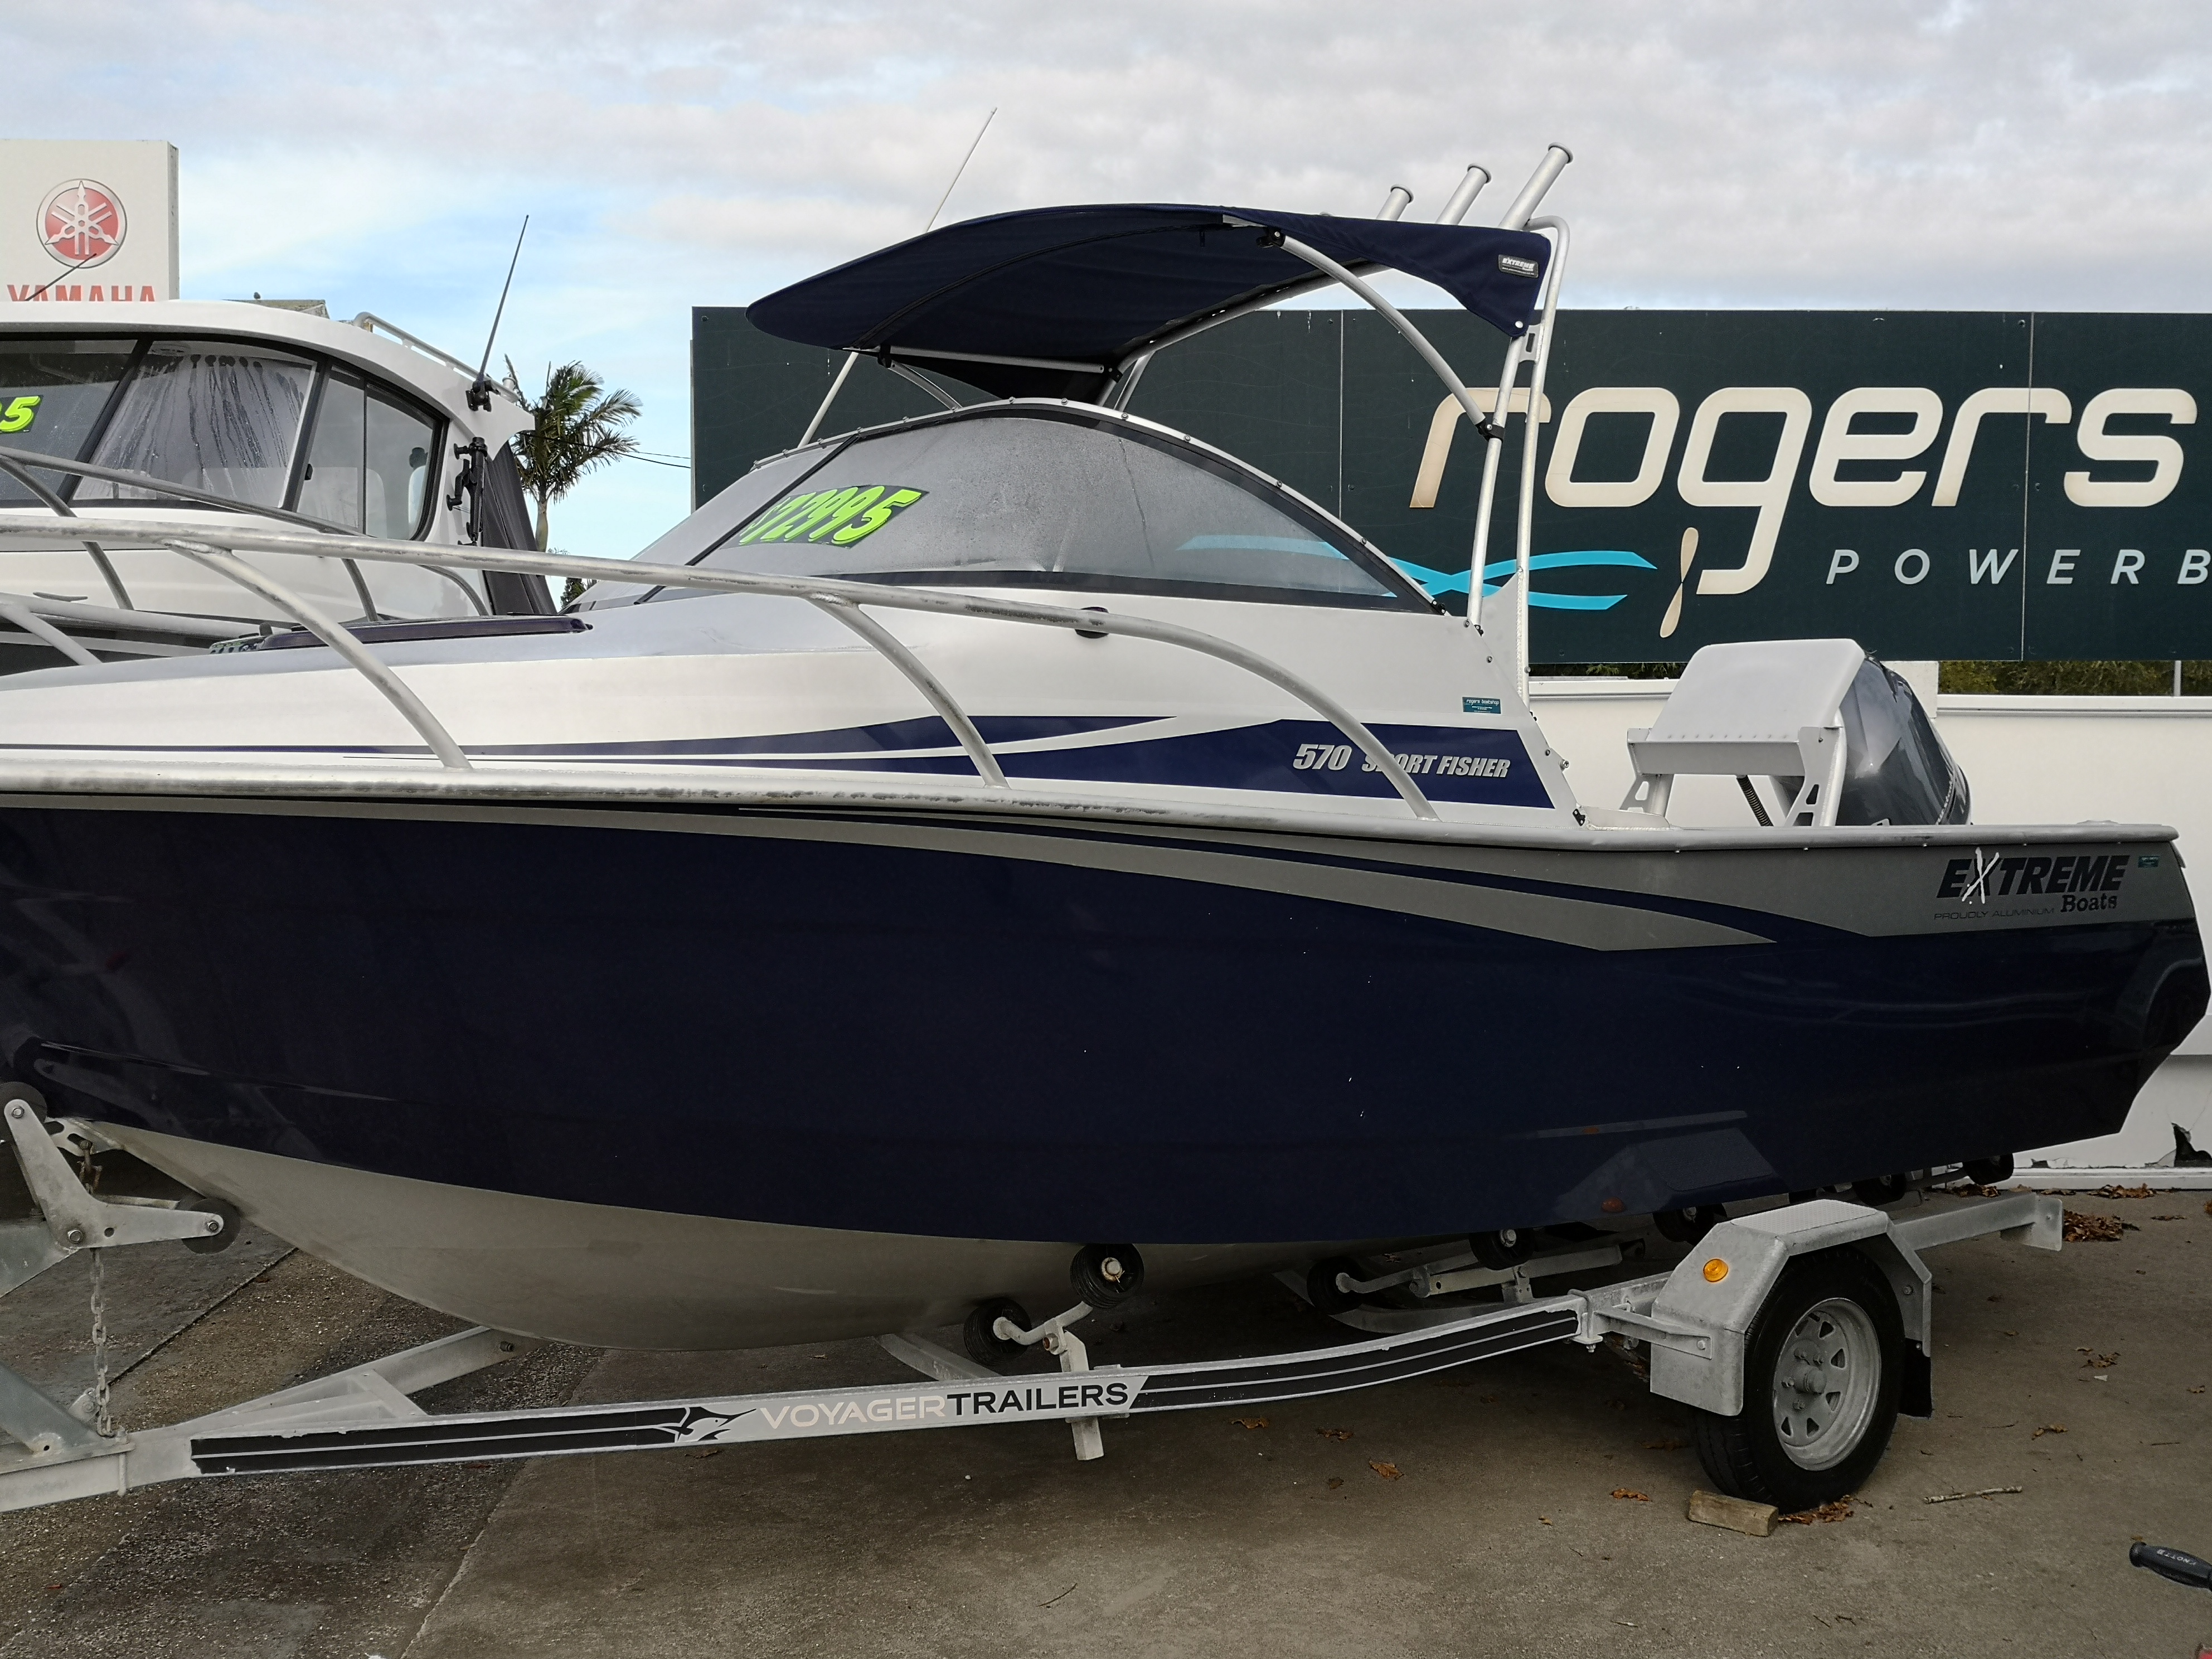 Rogers Boatshop: Extreme / 570SF-Sport Fisher / 2015